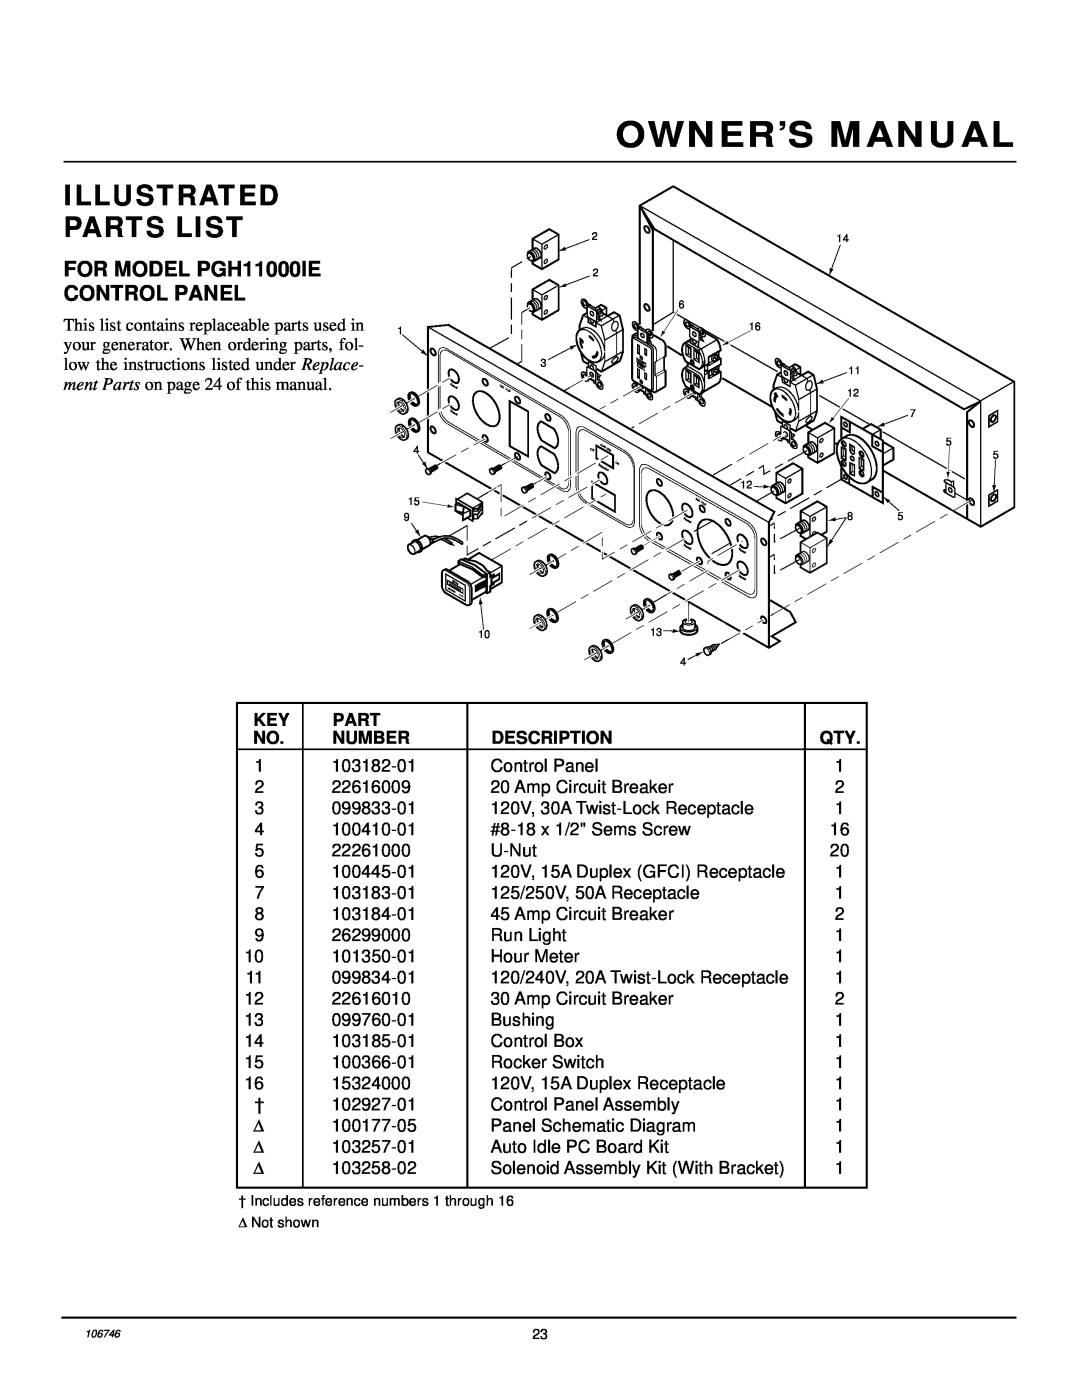 Desa PGH7500IE, PGH1100IE installation manual Illustrated, Parts List, FOR MODEL PGH11000IE, Control Panel 